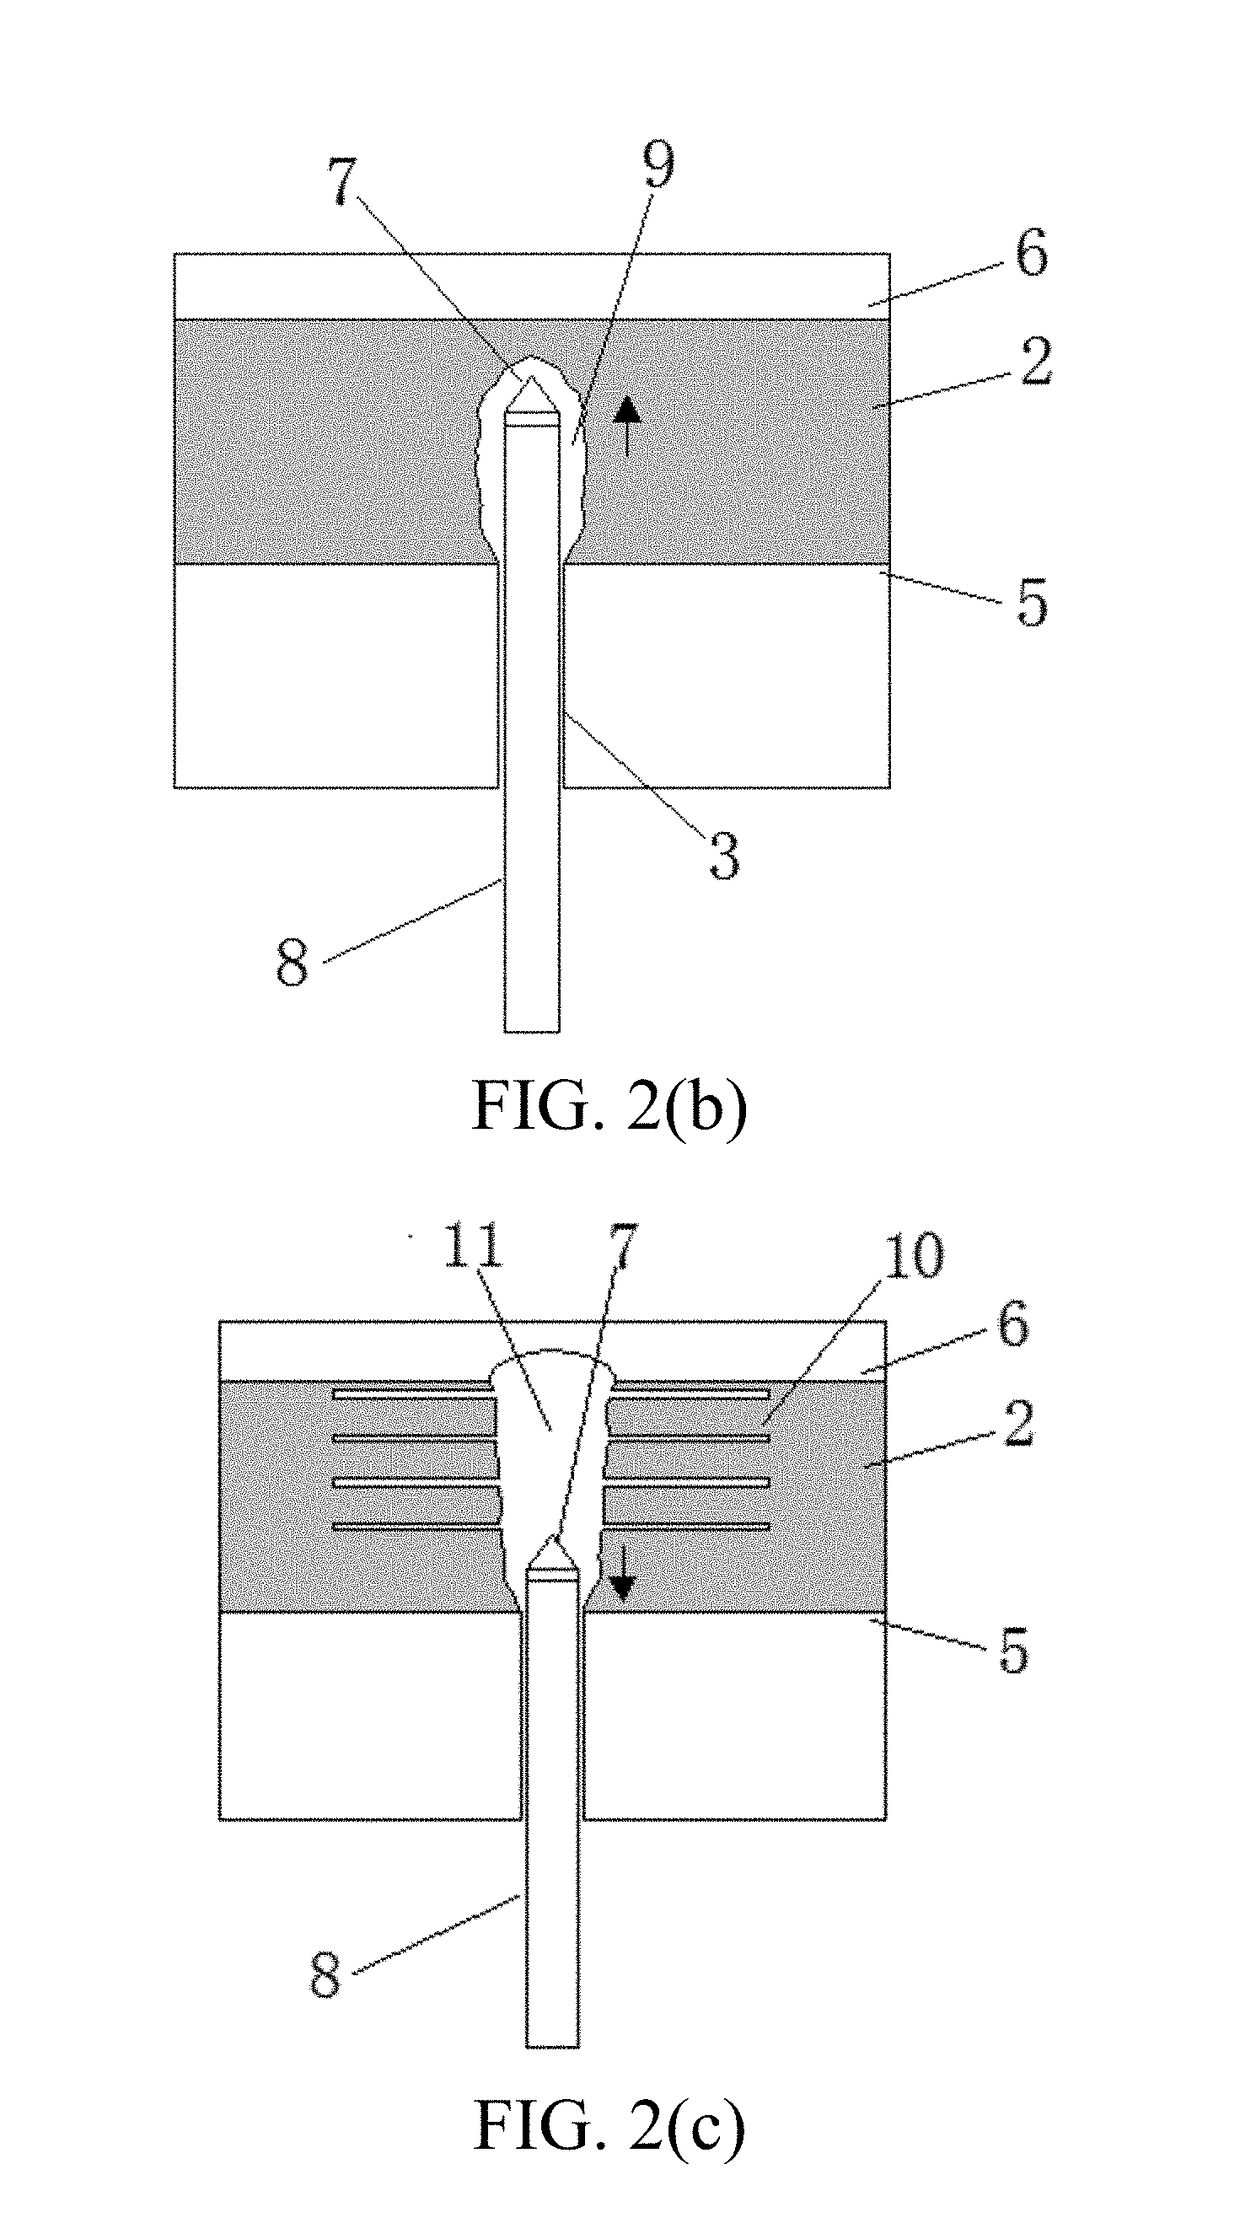 Method of performing combined drilling, flushing, and cutting operations on coal seam having high gas content and prone to bursts to relieve pressure and increase permeability